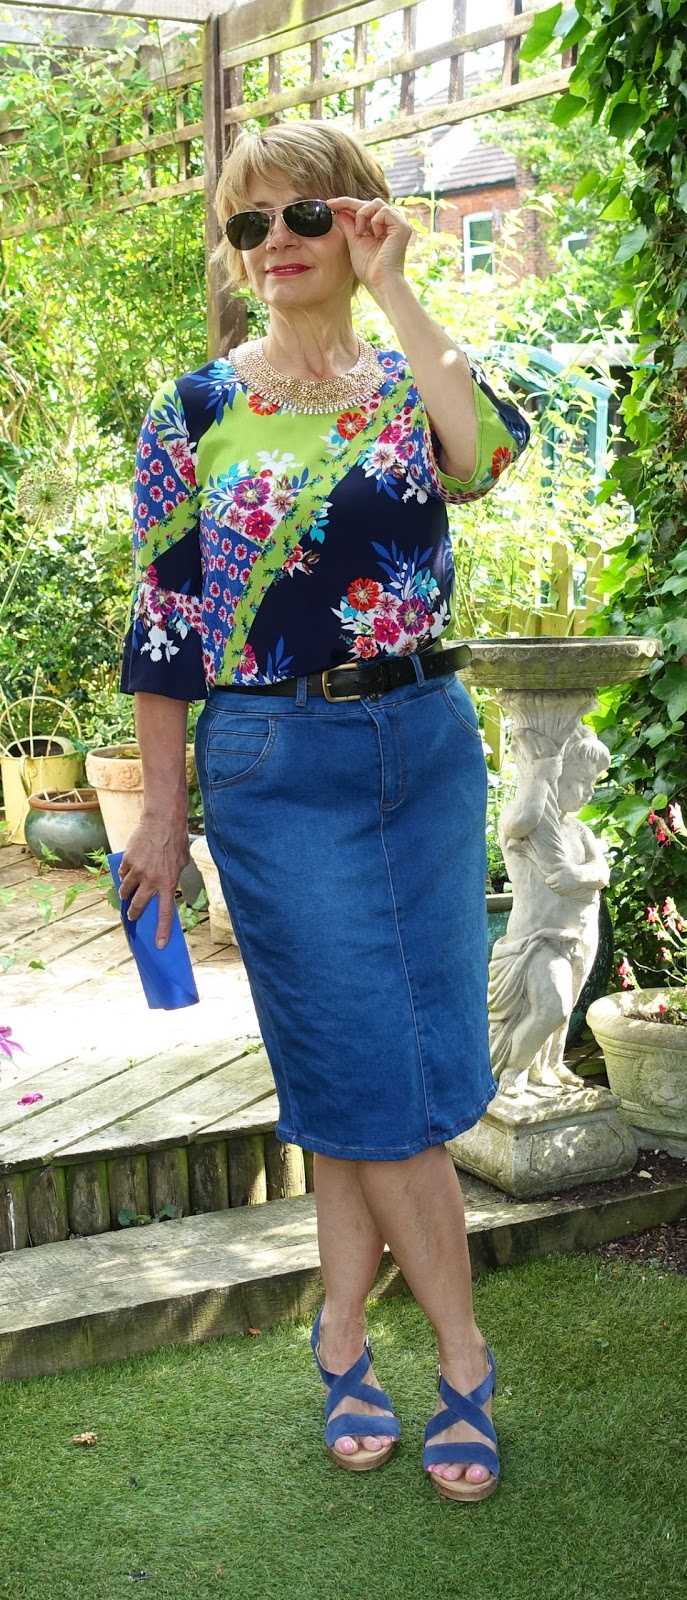 A denim skirt goes with so many looks, in this case a brightly coloured patterned top